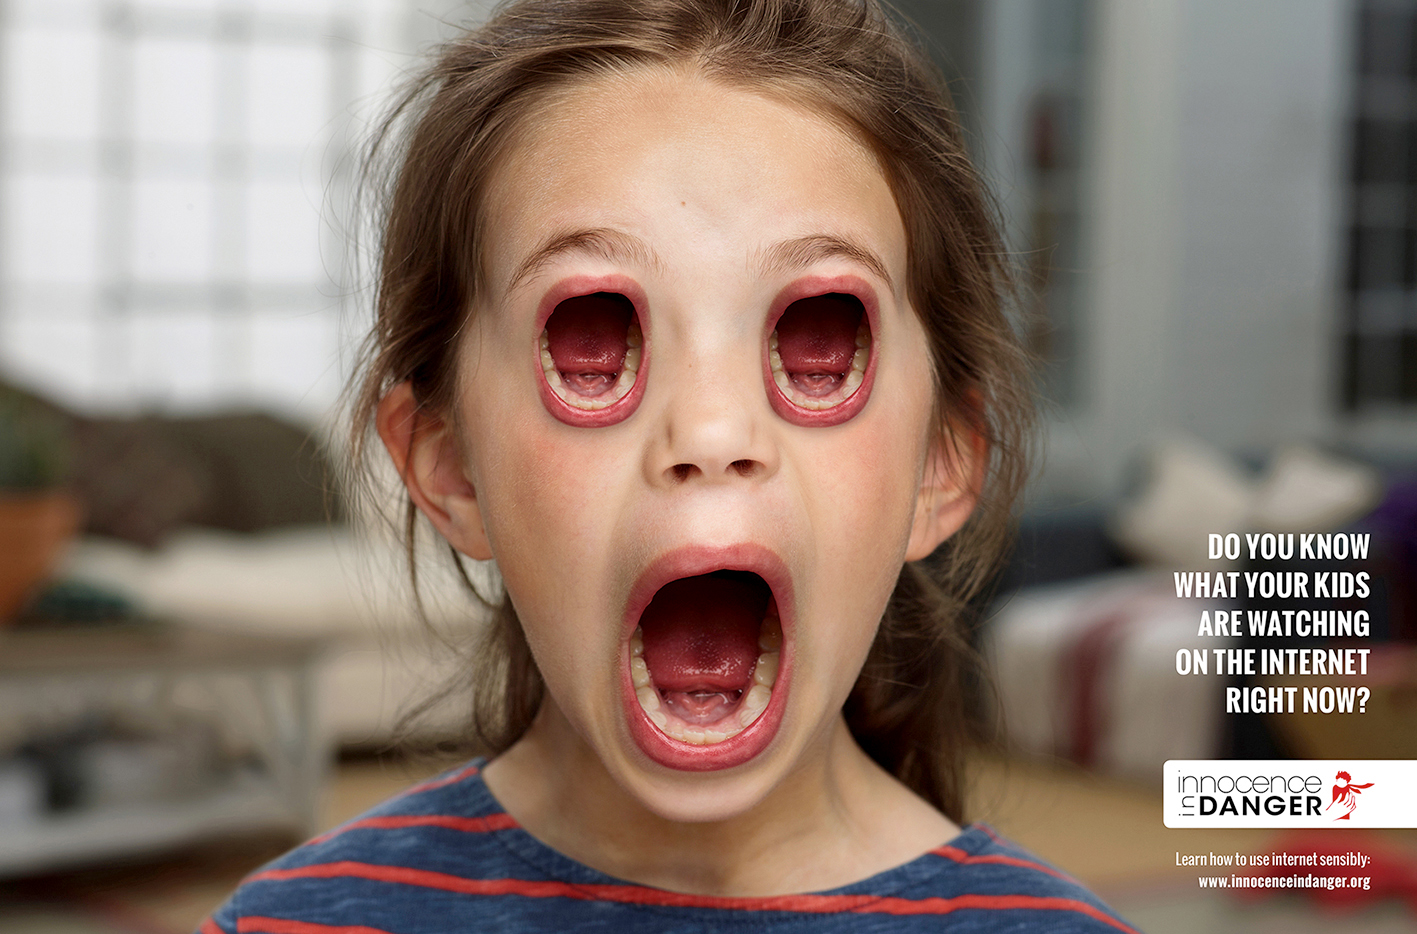 PHOTO: The German ad agency Publicis Frankfurt has created a series of shocking images of kids whose eyes are replaced by screaming mouths as part of a campaign to urge parents to pay attention to what their children are doing online.